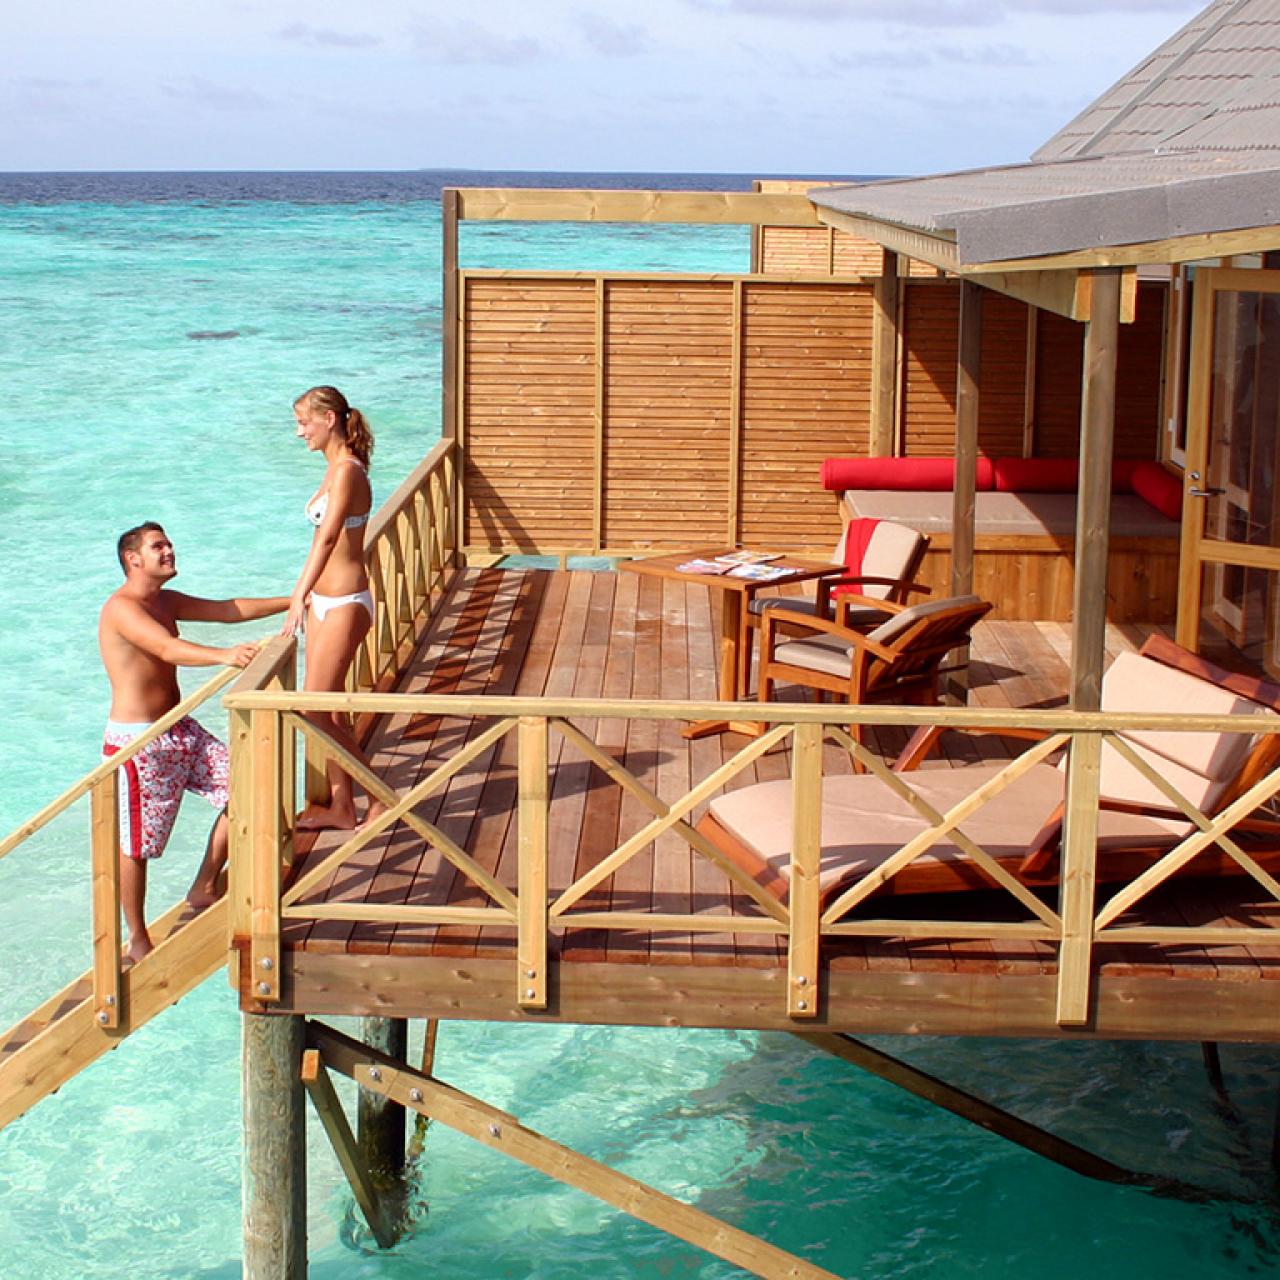 The Best Maldives Honeymoon Escapes, From Overwater Villas to